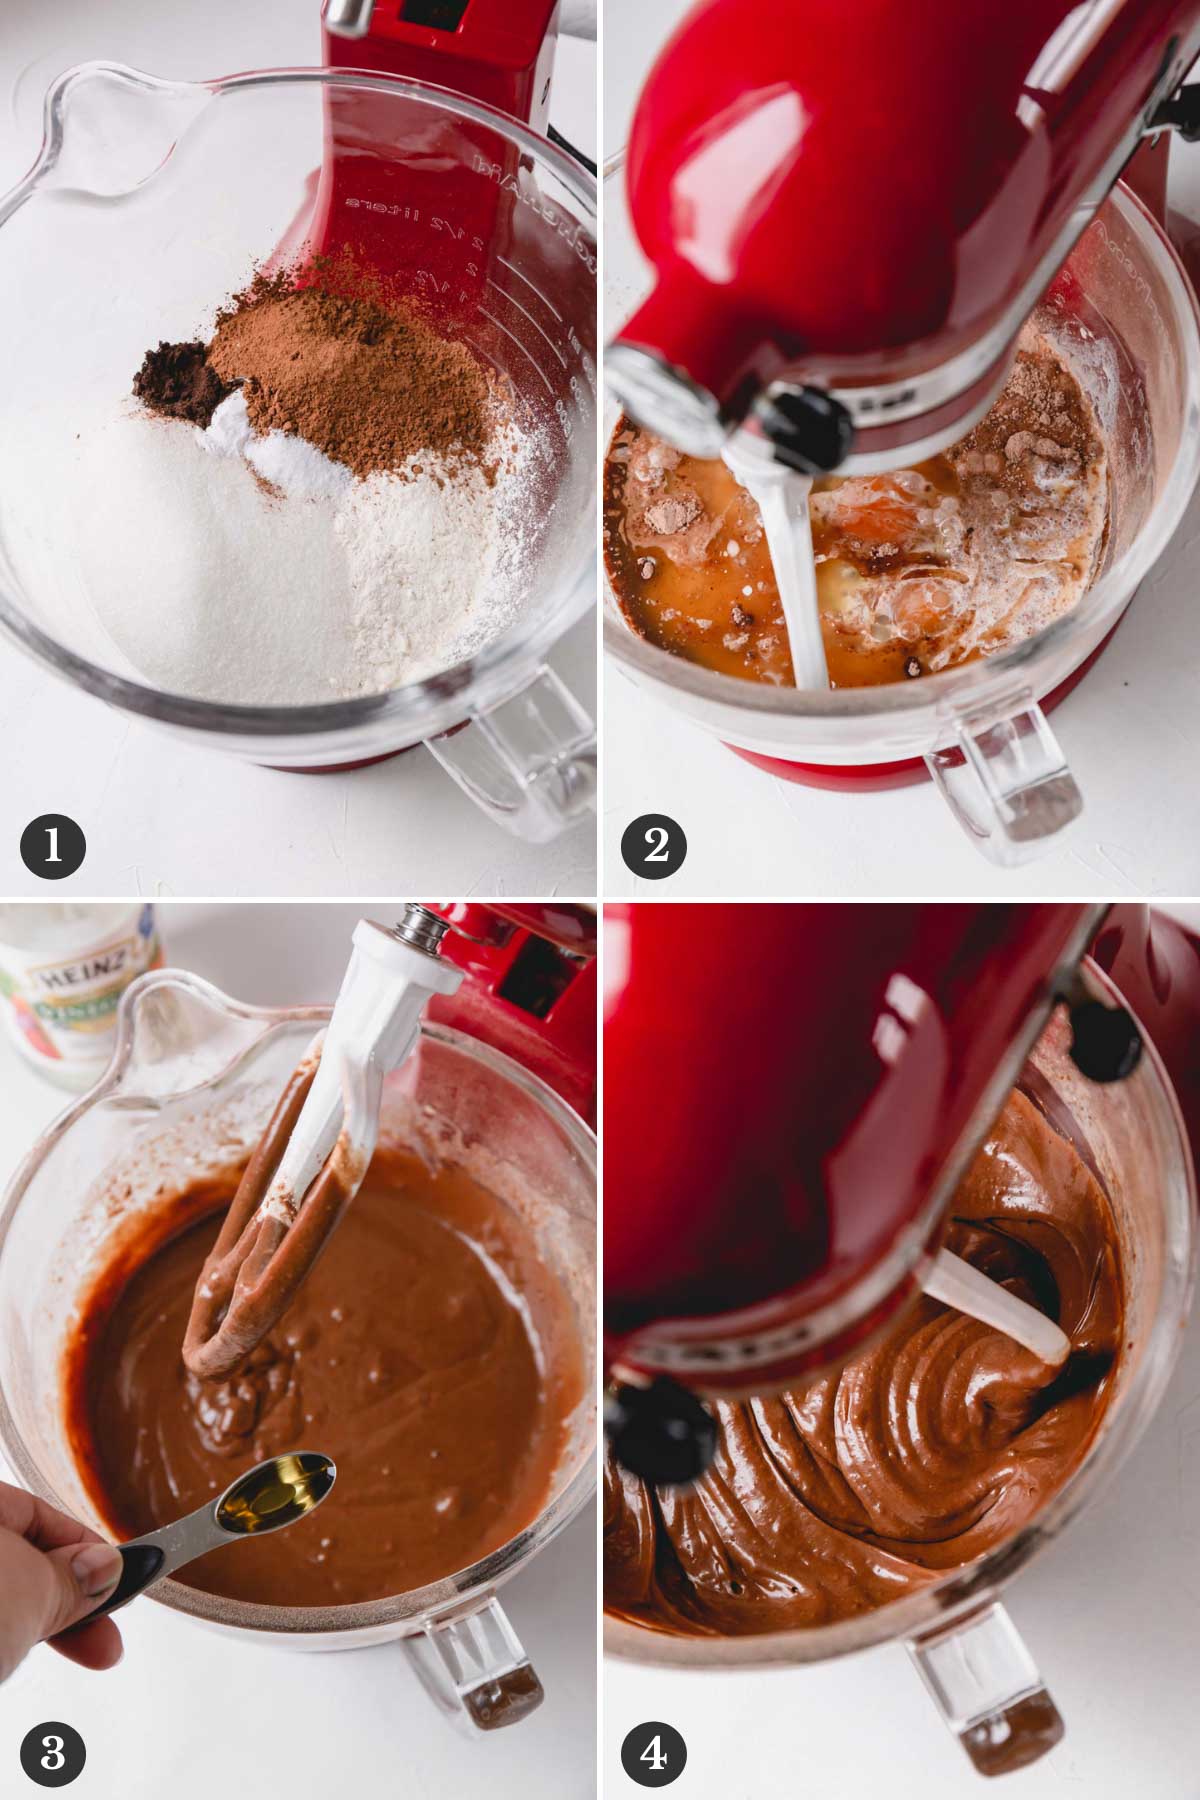 Step by step photos of making chocolate cake batter.